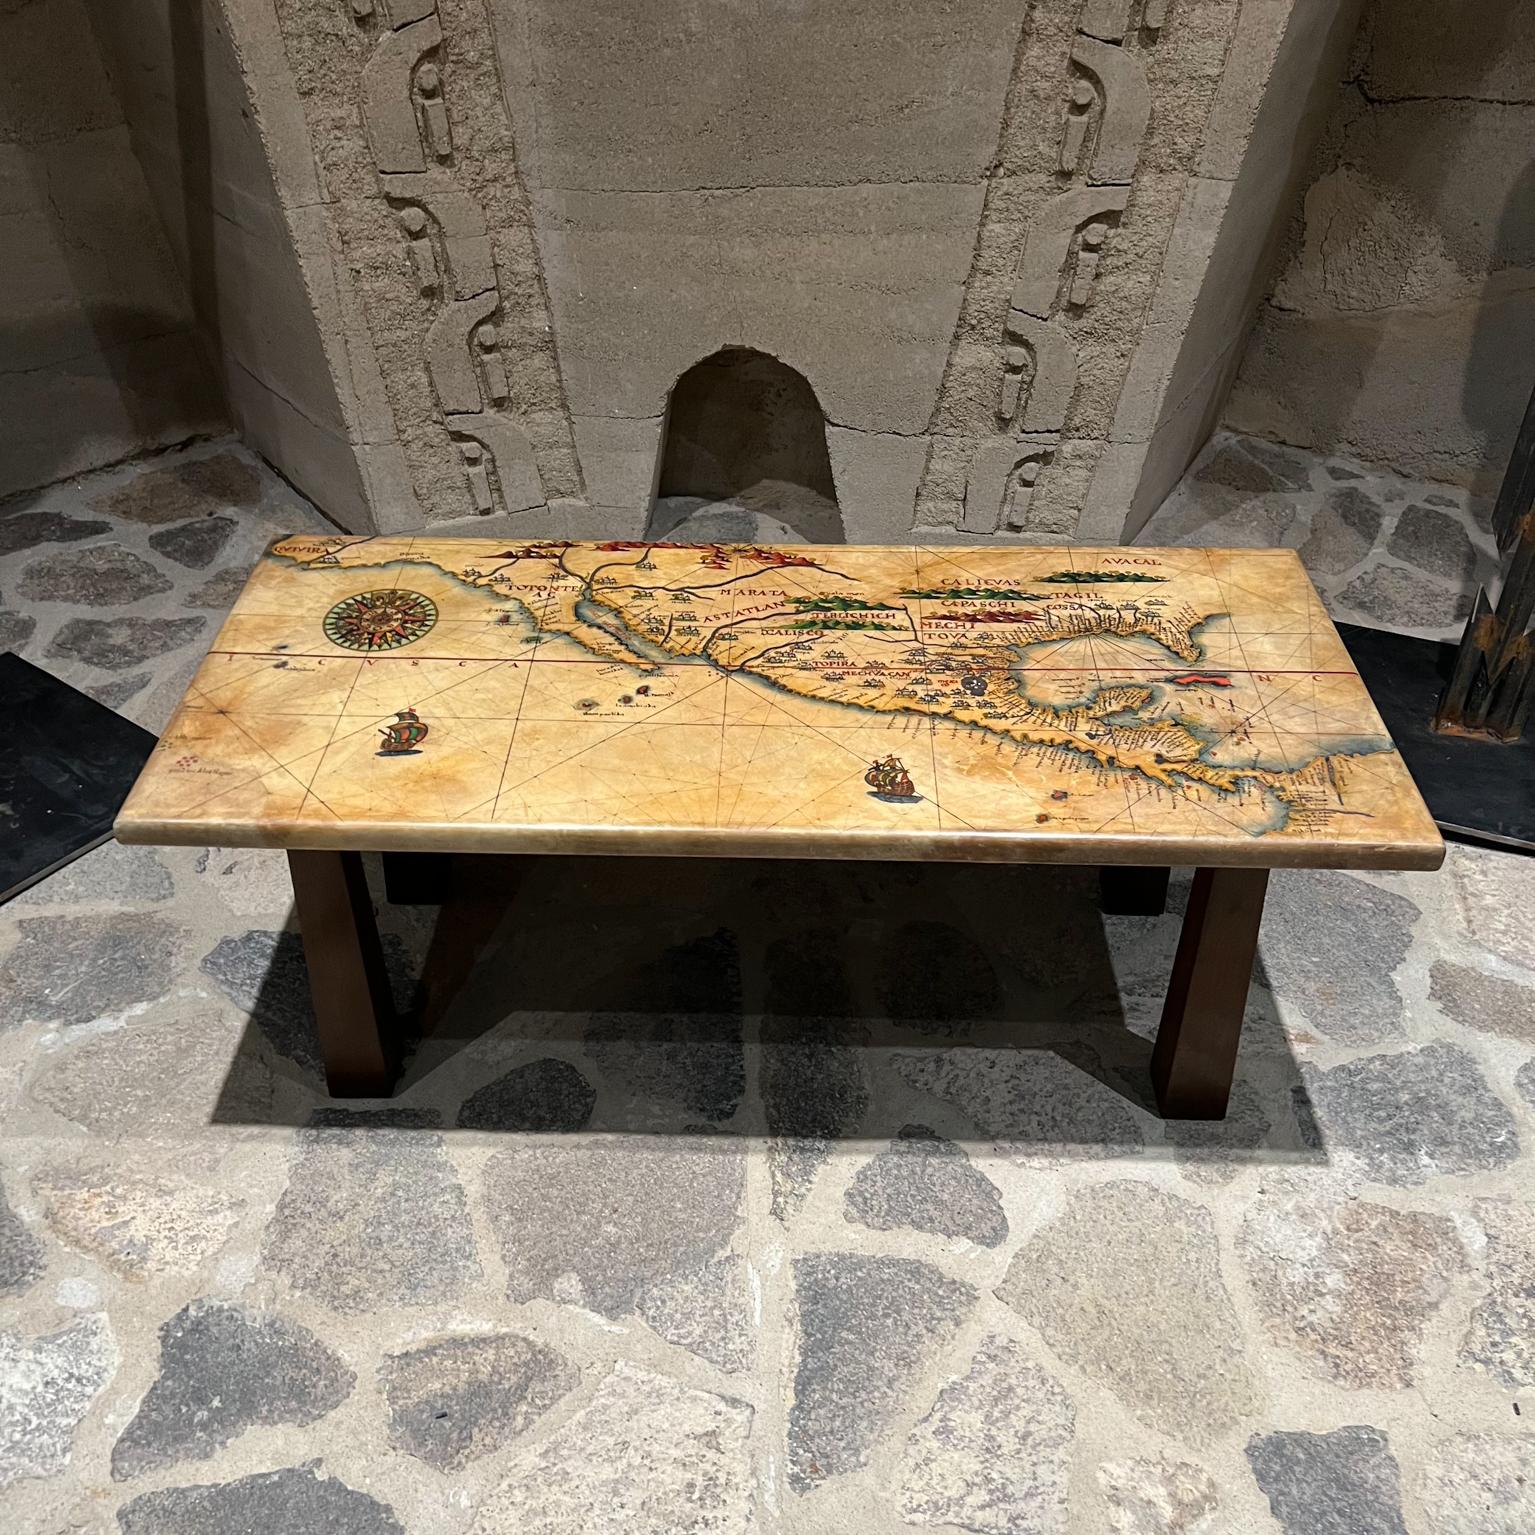 1980s María Teresa Méndez art map coffee table Mexico City
Early Mexico Map art design on tabletop.
Coffee table attributed to María Teresa Méndez (unsigned).
Craftmanship Quality is consistent with other work by MTM.
Hand painted-decorated in